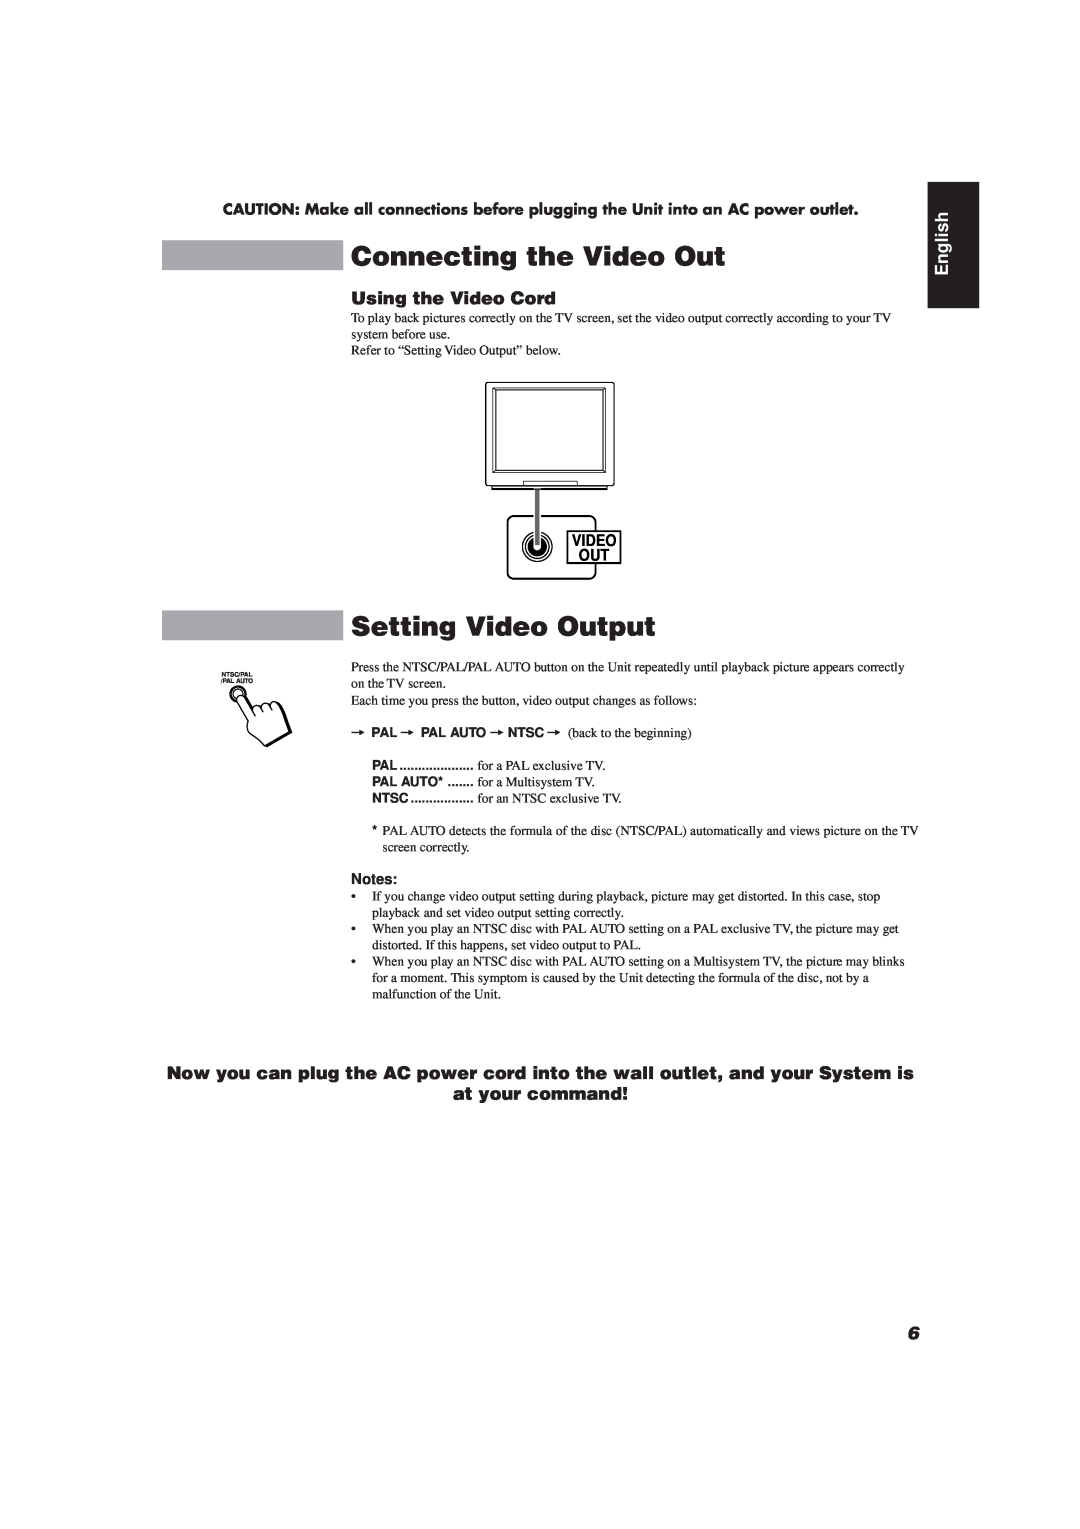 JVC MX-J111V manual Connecting the Video Out, Setting Video Output, Using the Video Cord, at your command, English 